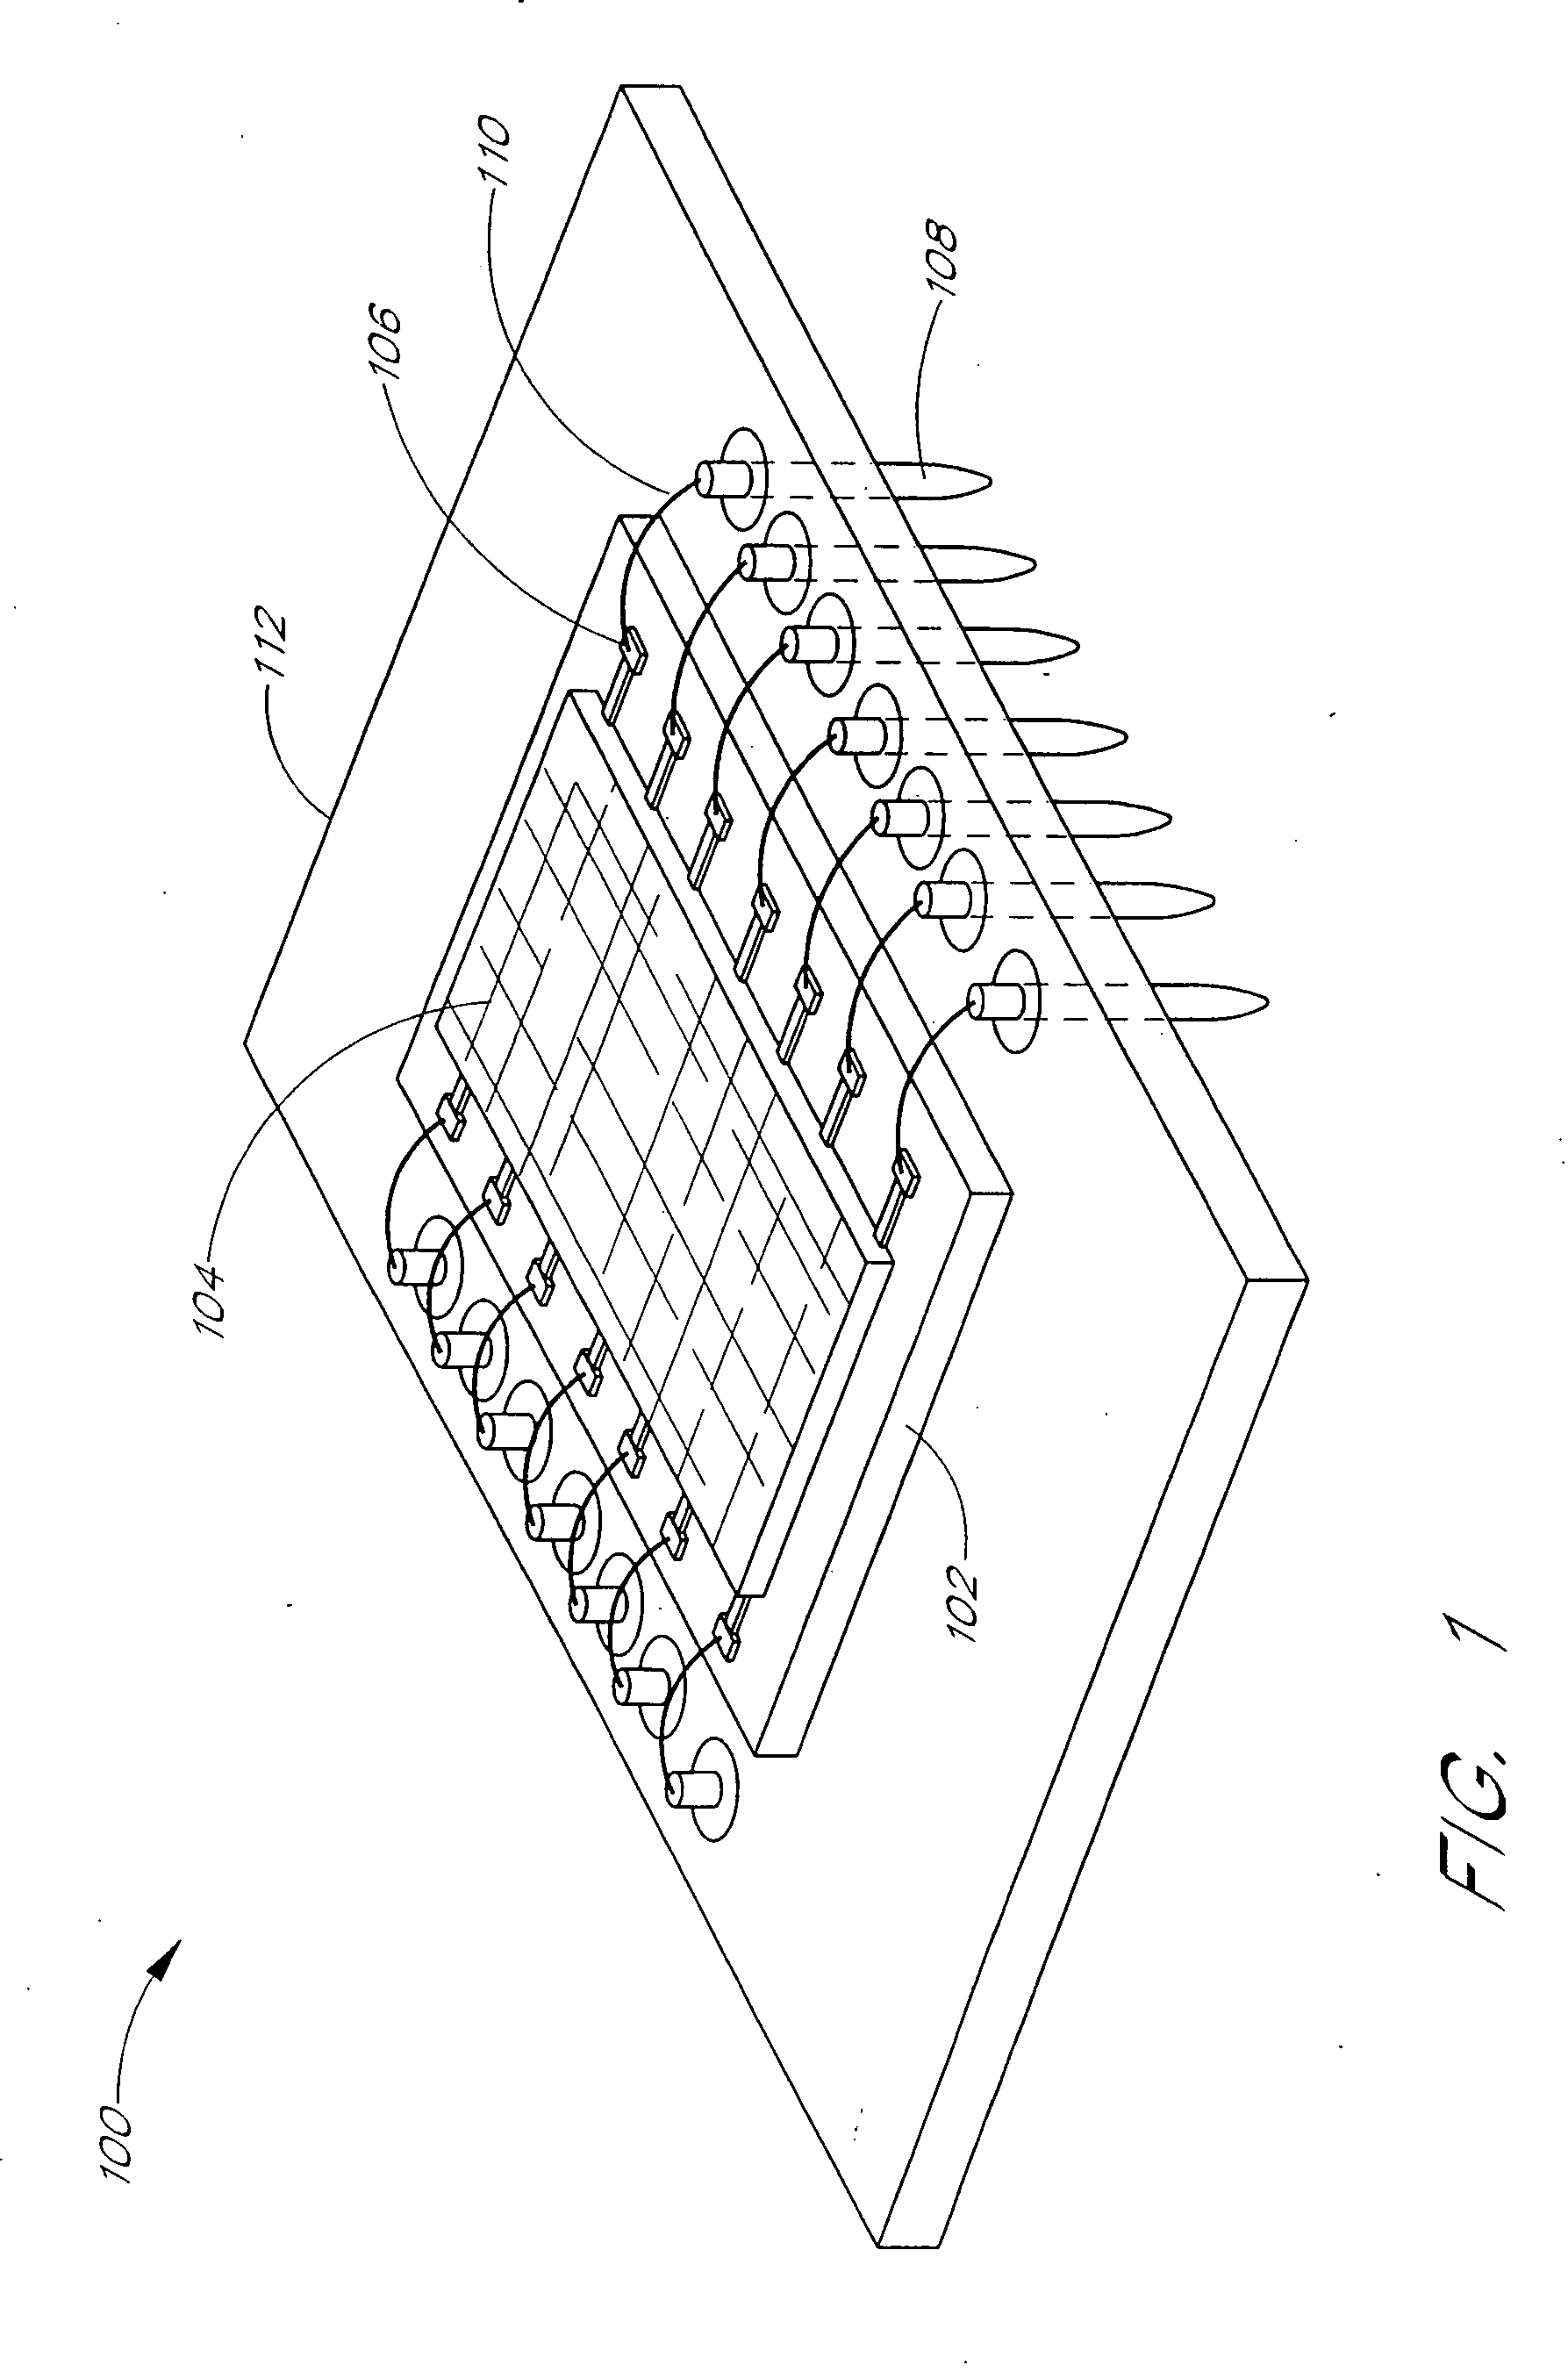 High-density packaging of integrated circuits